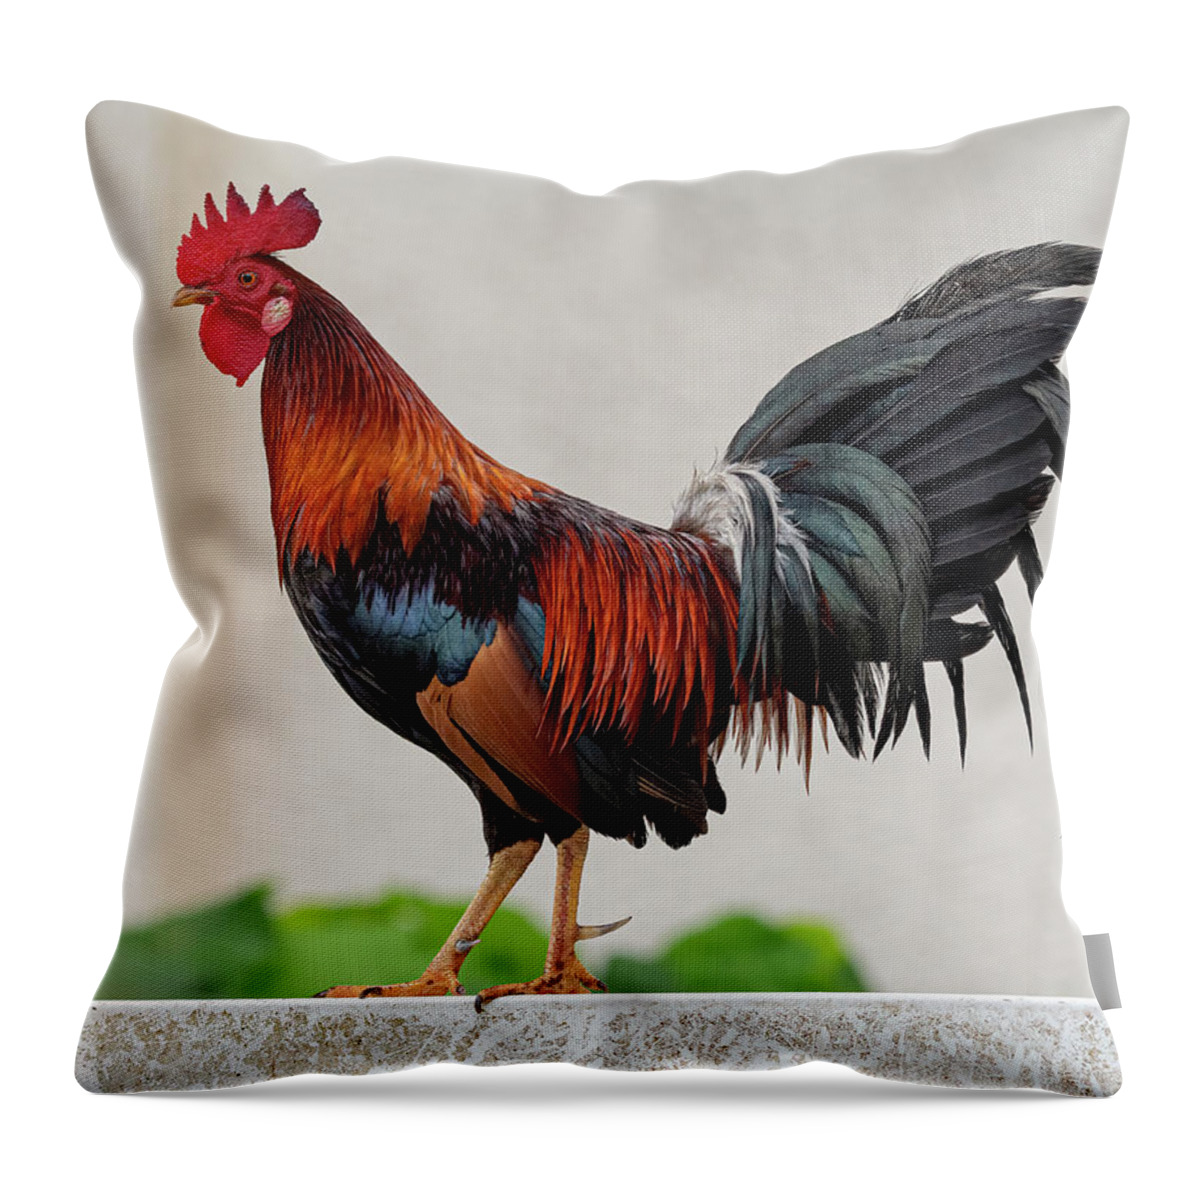 Feral Throw Pillow featuring the photograph Feral Rooster by Rick Mosher